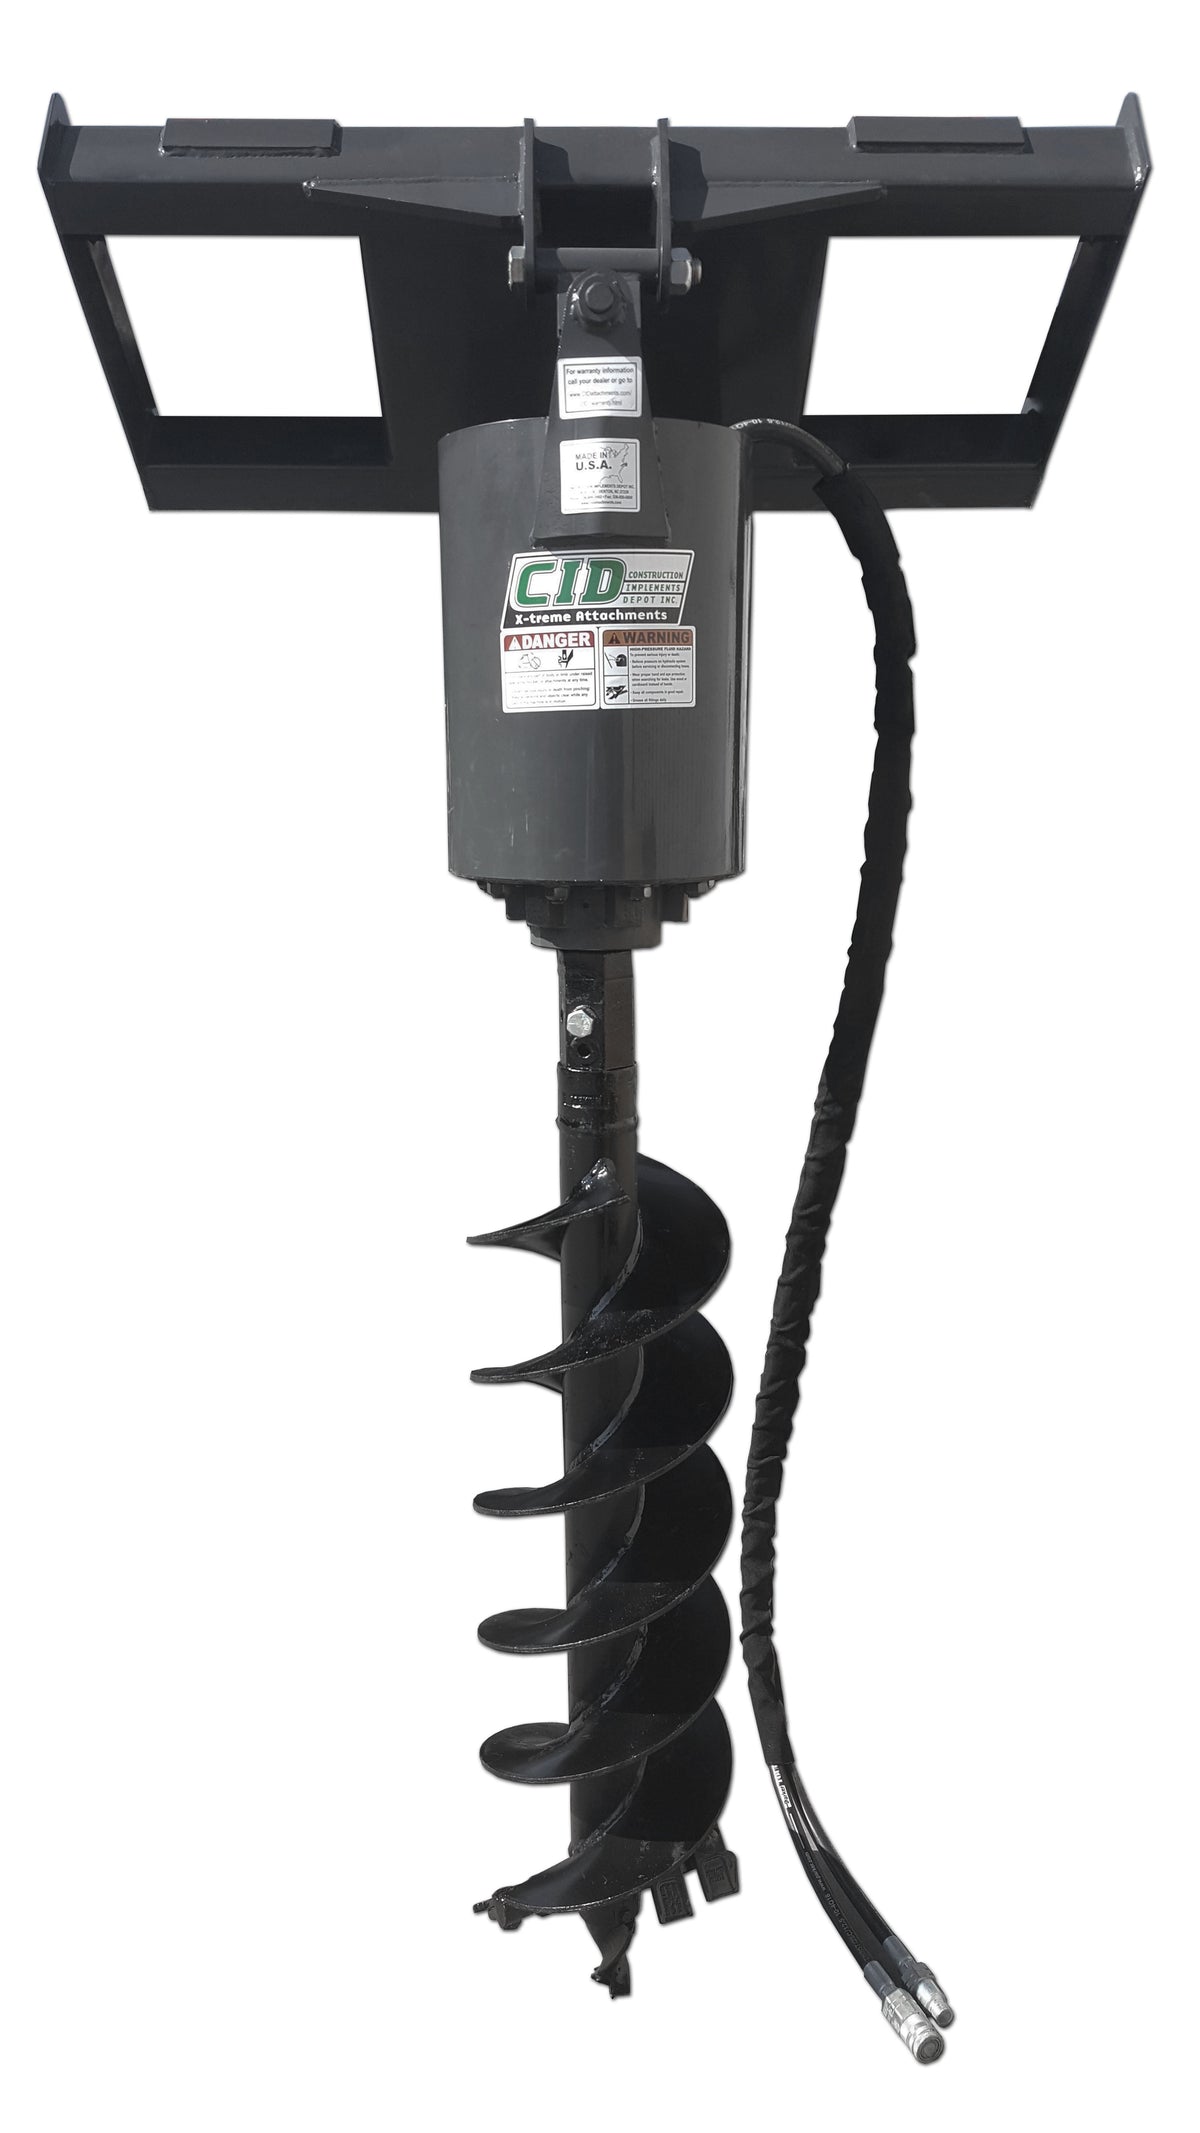 CID X-TREME / Heavy Duty Auger drives for Skid Steers